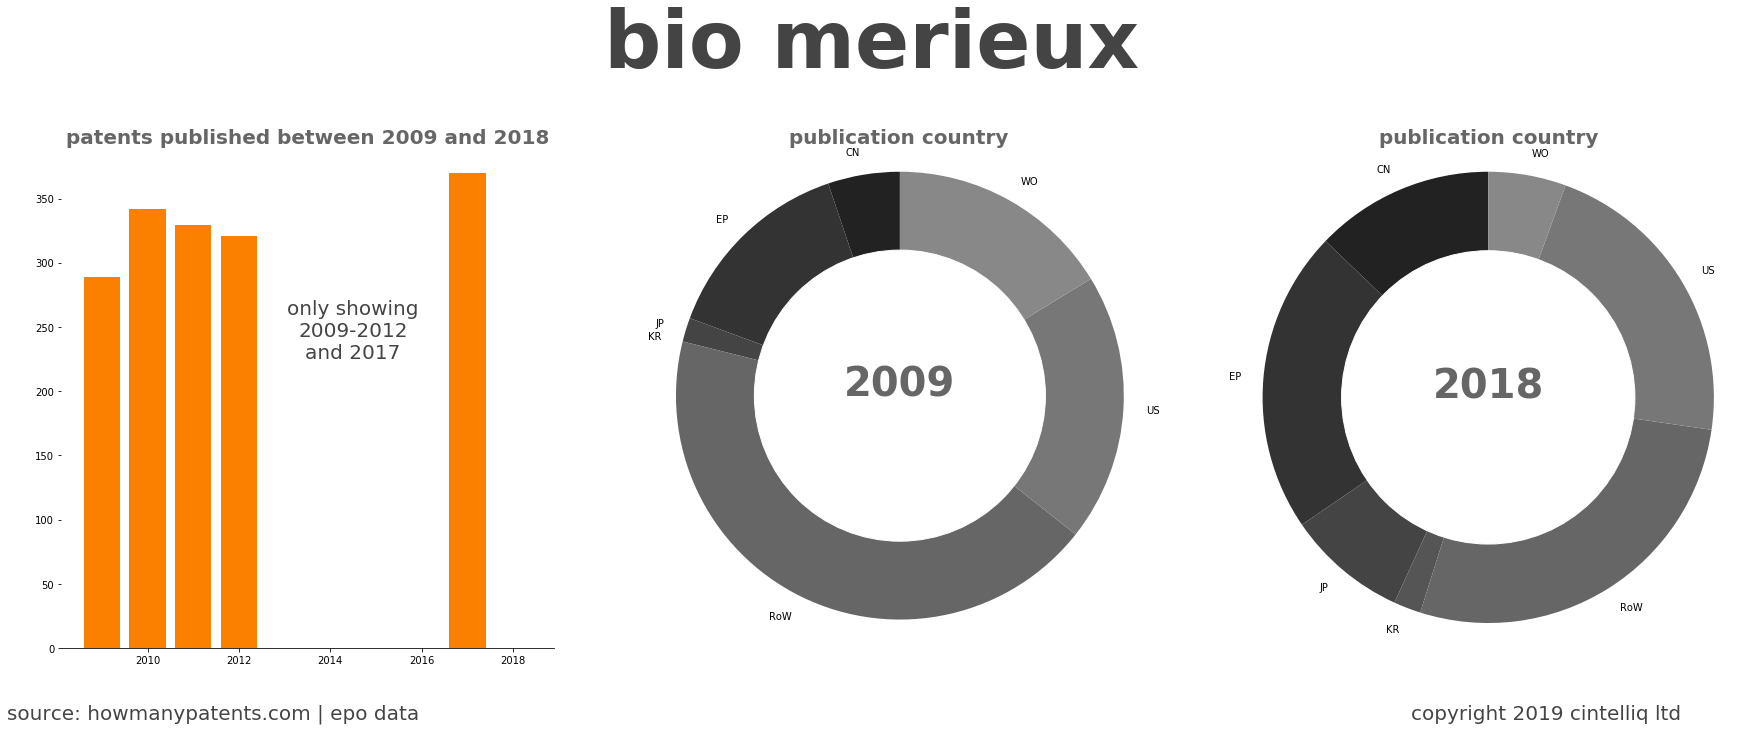 summary of patents for Bio Merieux